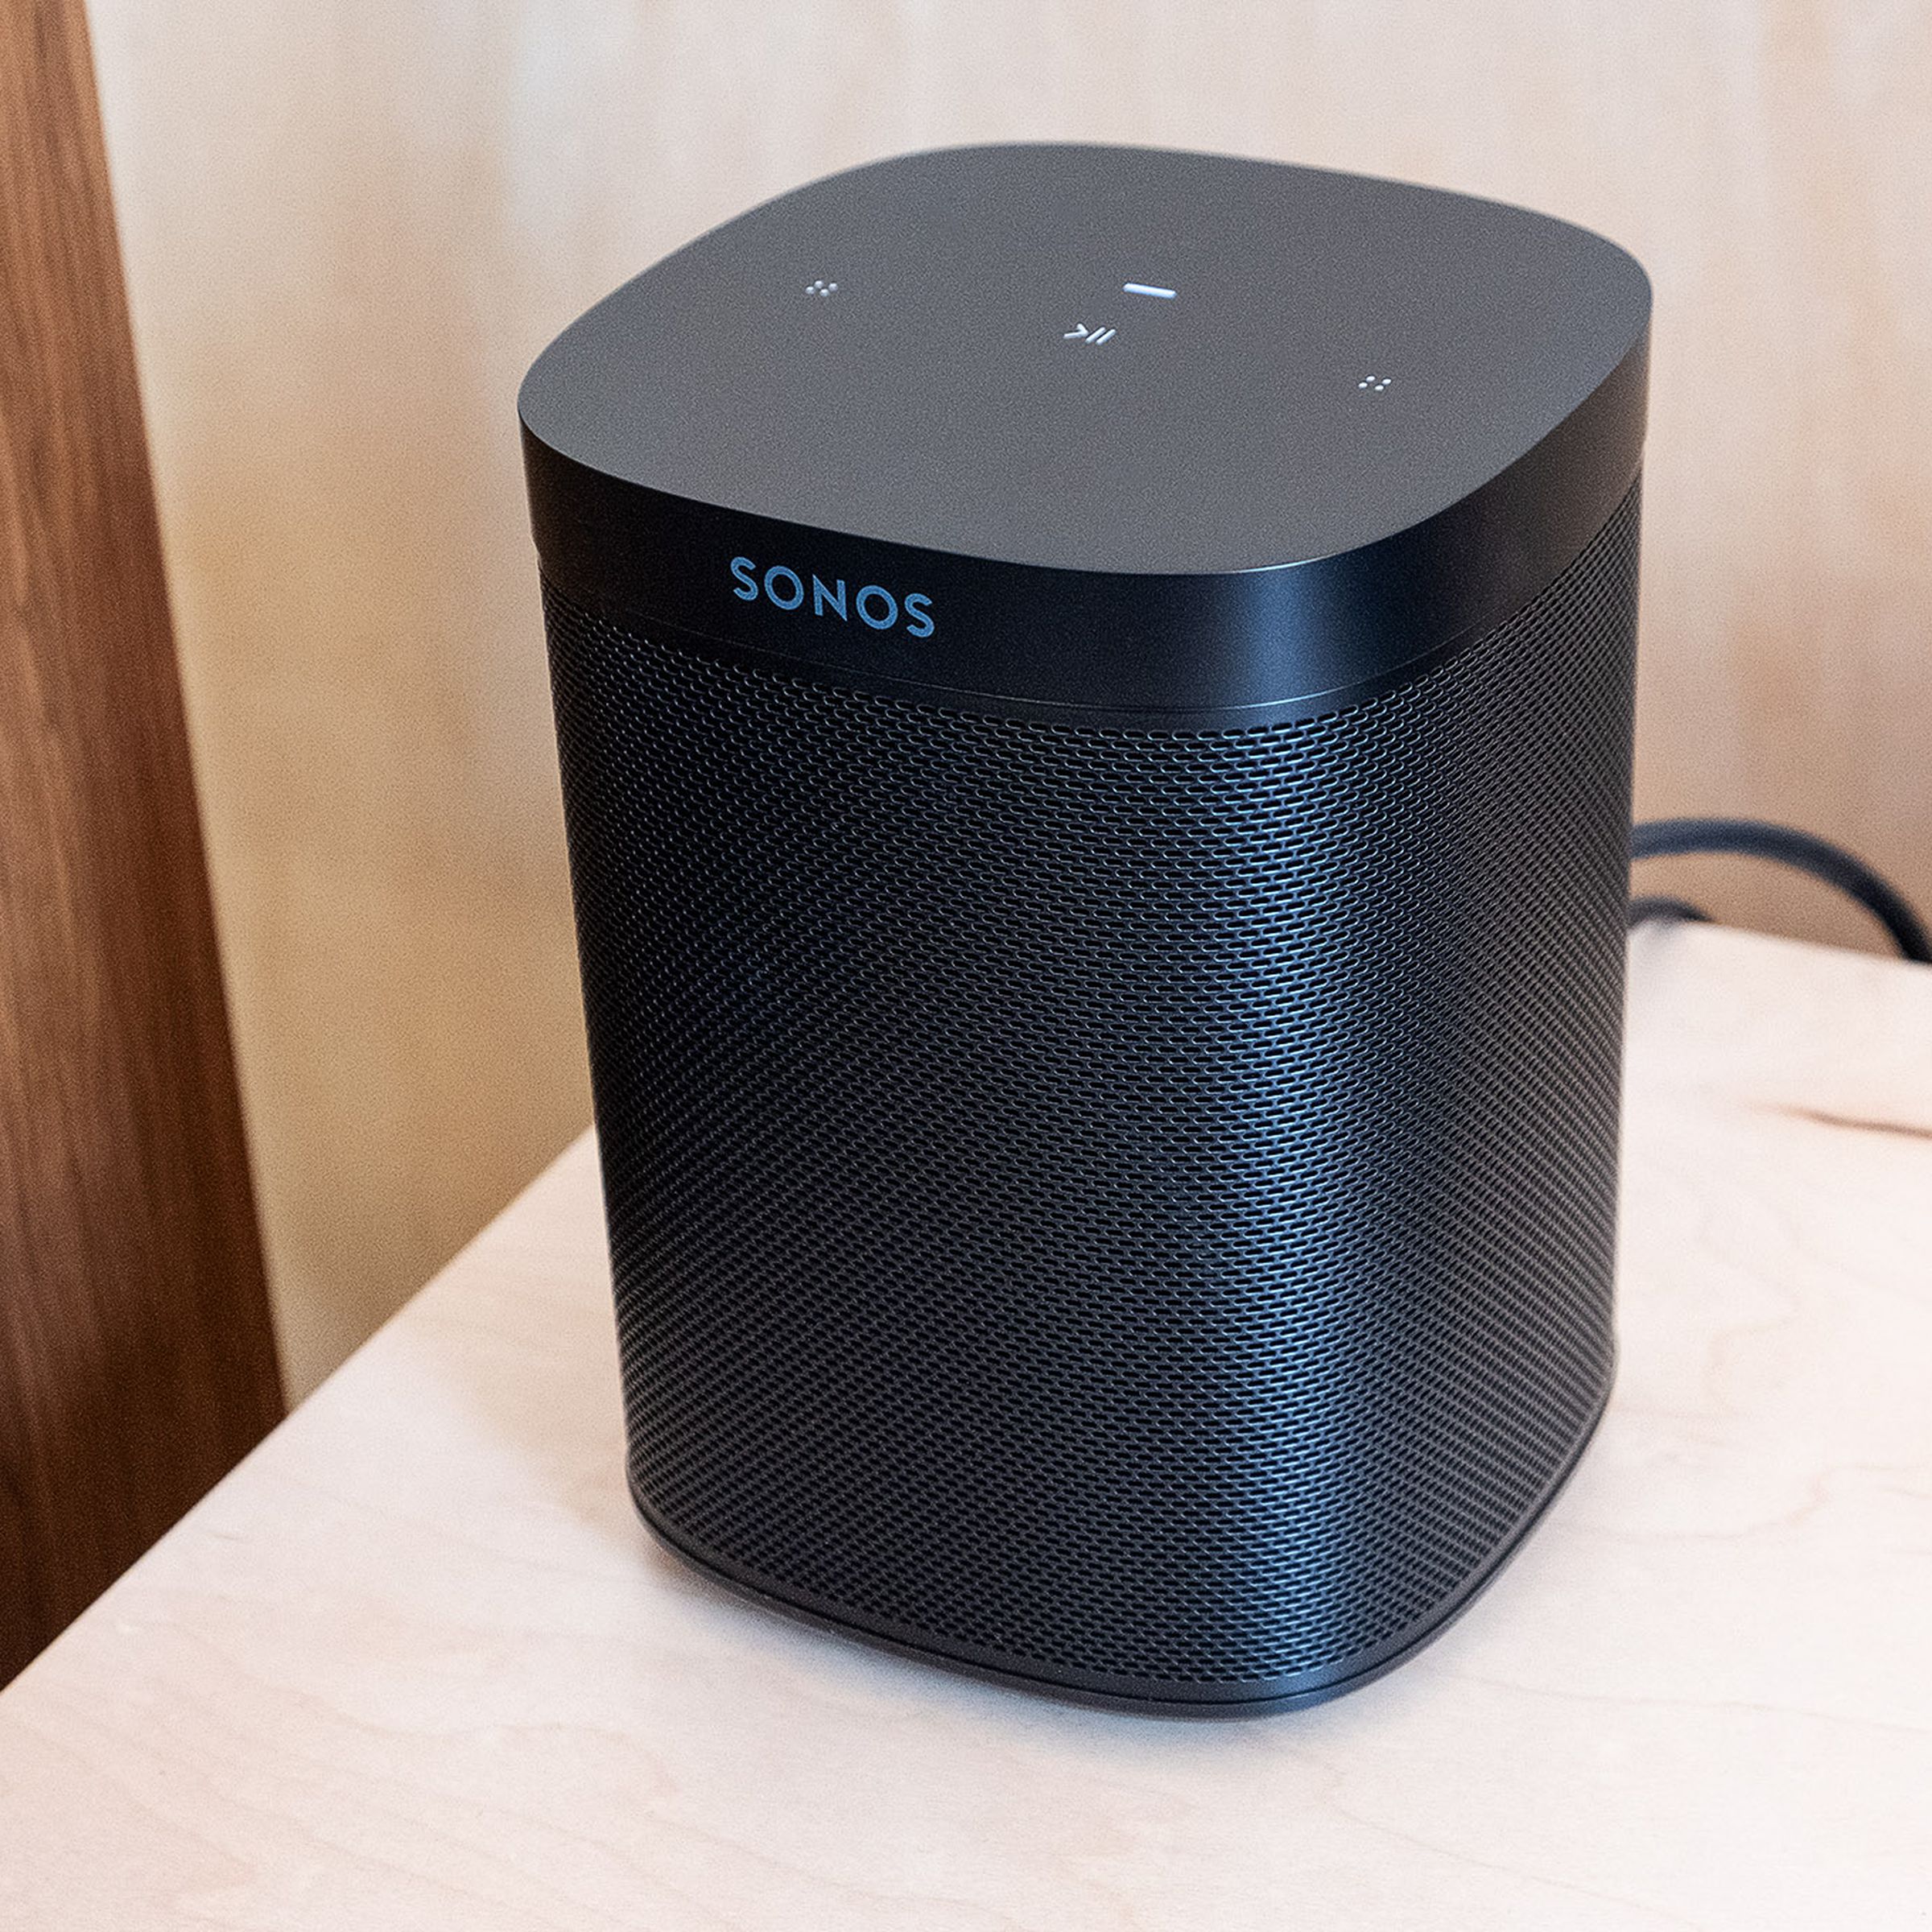 The Sonos One SL sitting on a table.